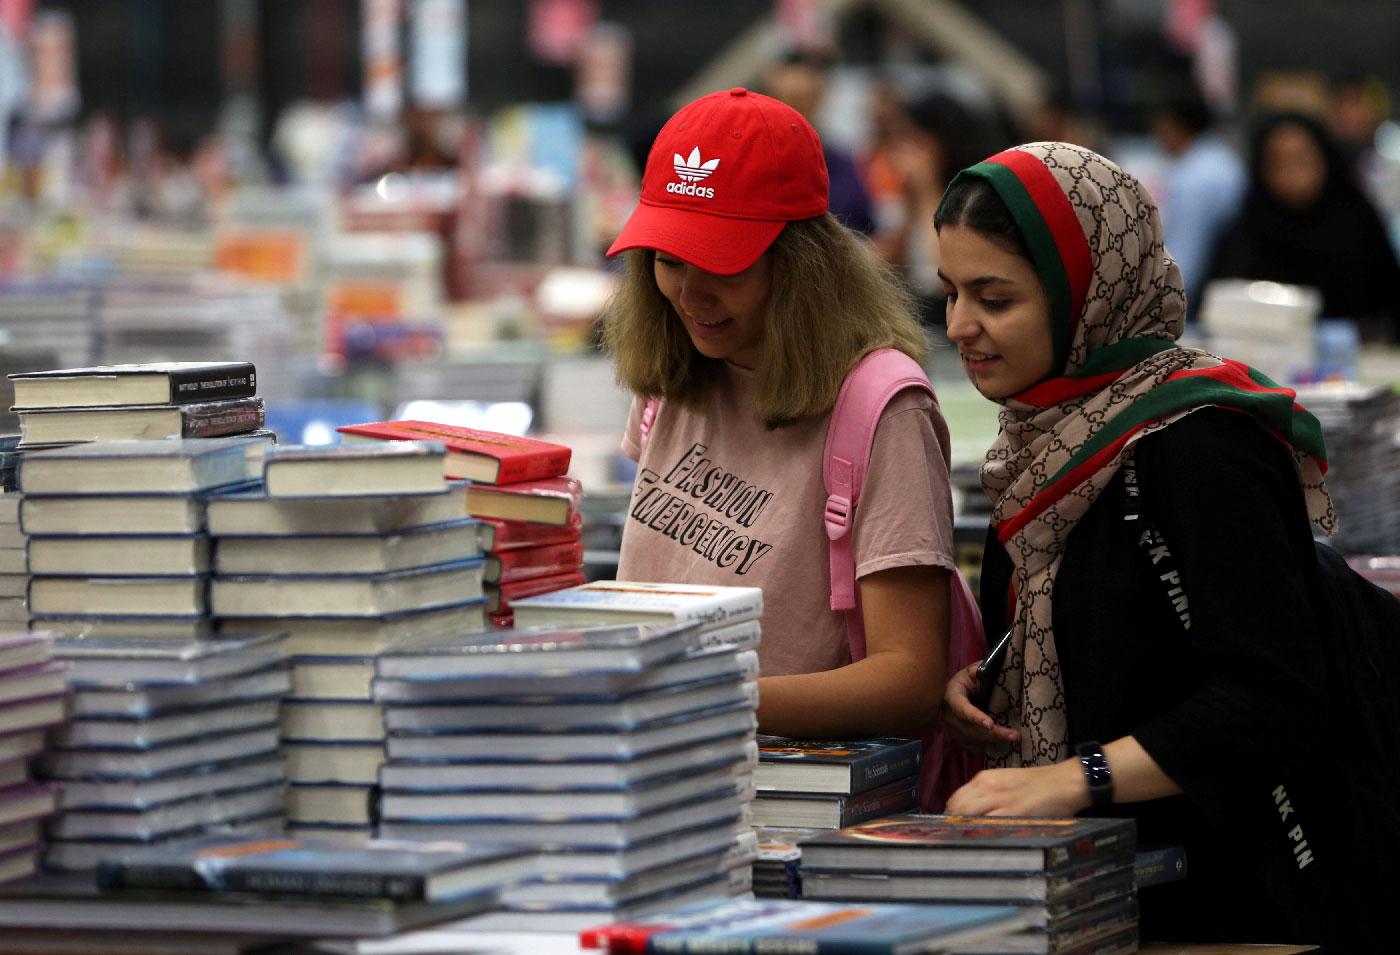 Visitors read books at the Big Bad Wolf Book Sale.